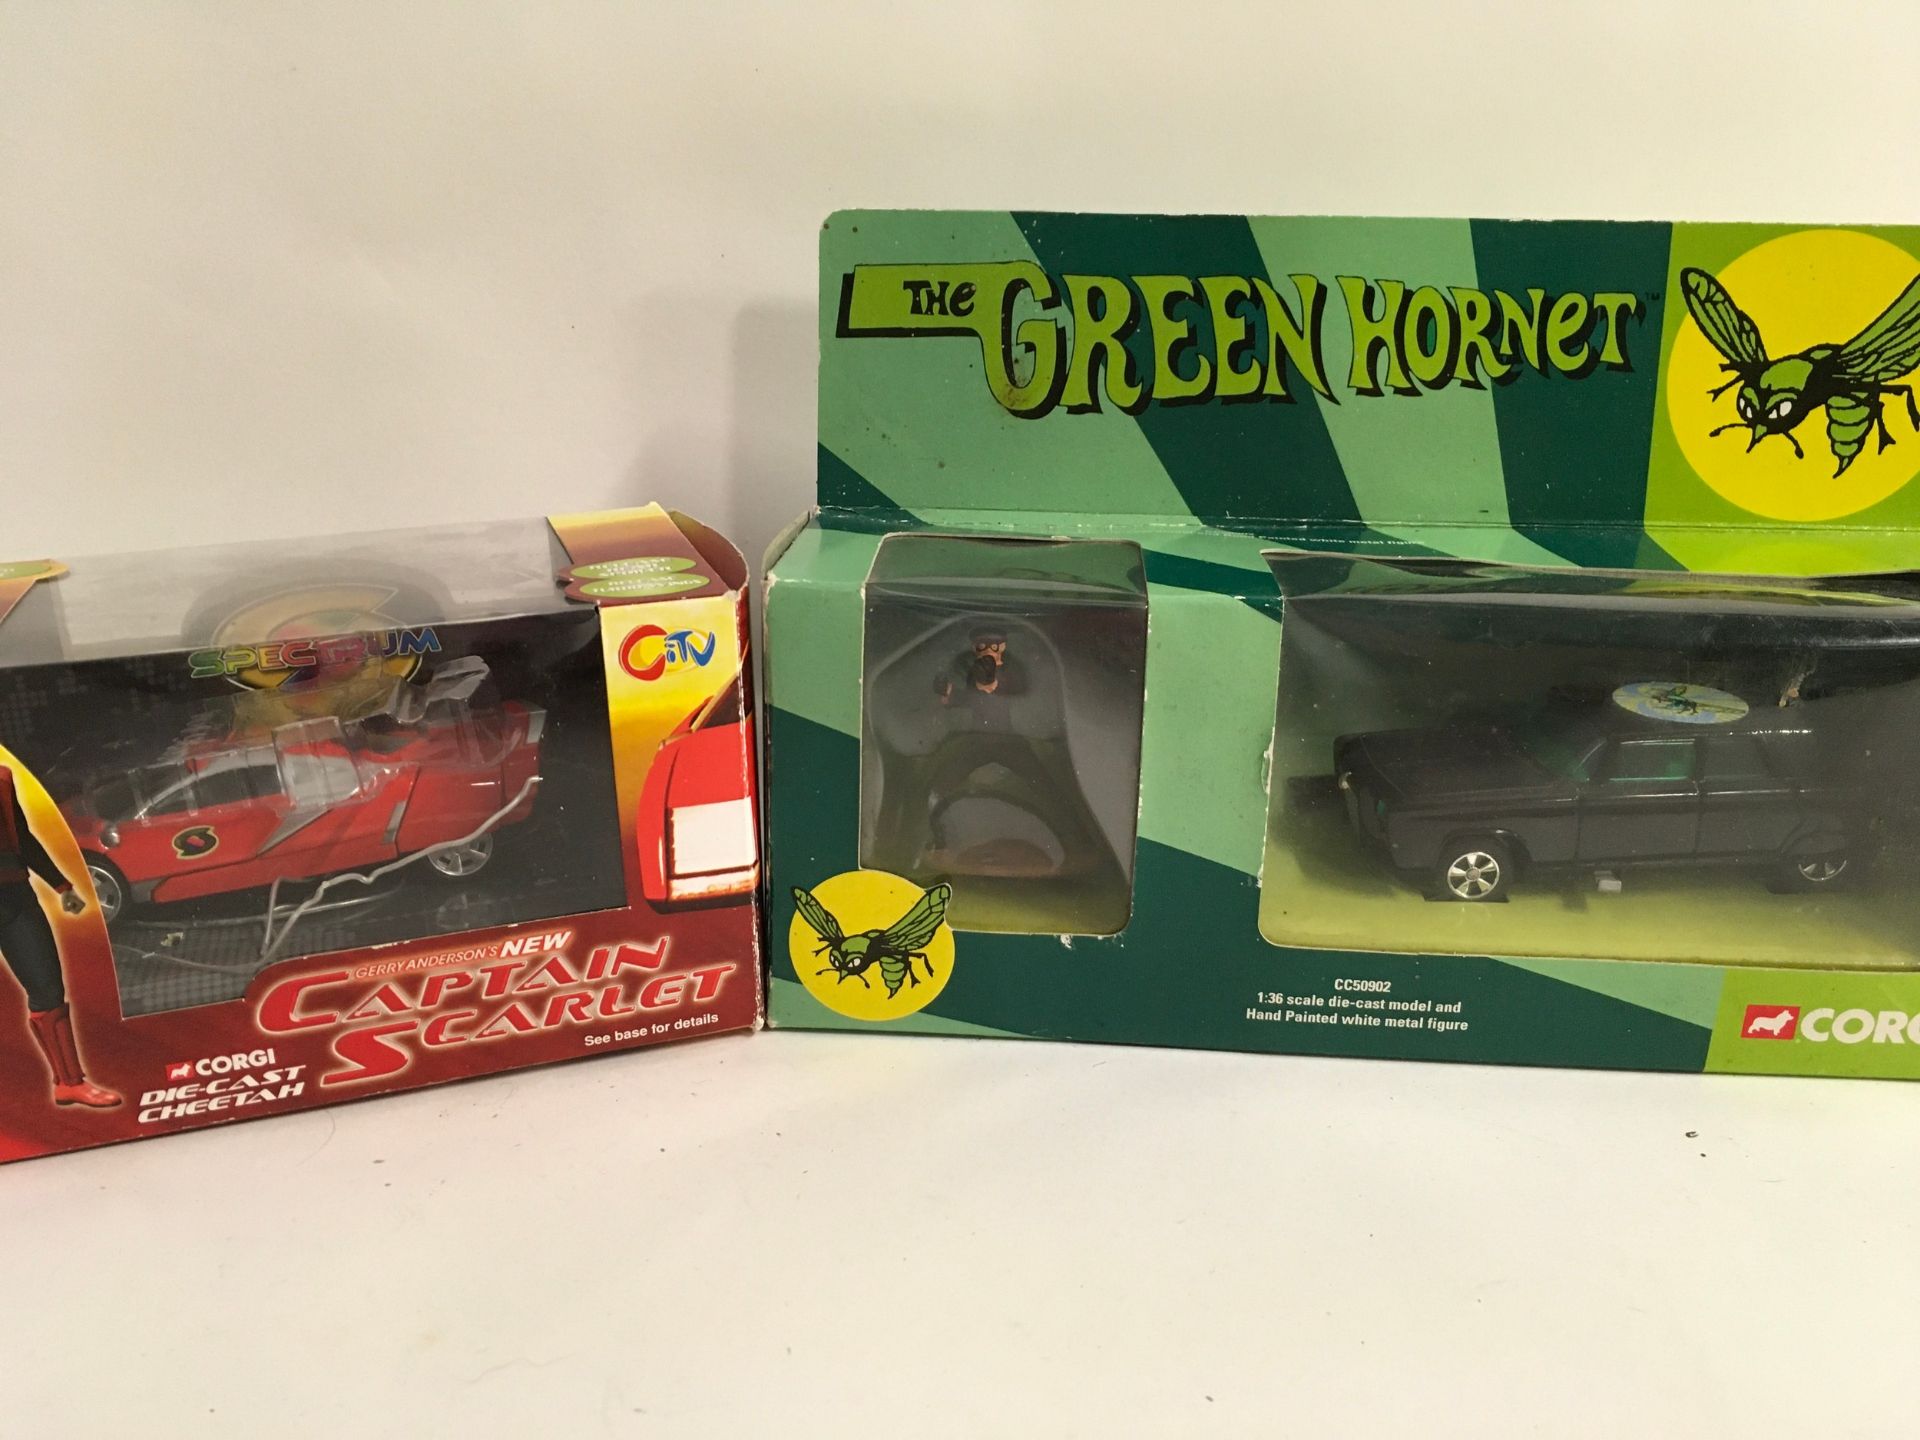 Collection of boxed Corgi TV and film related models to include The Green Hornet, Return of the - Image 3 of 5